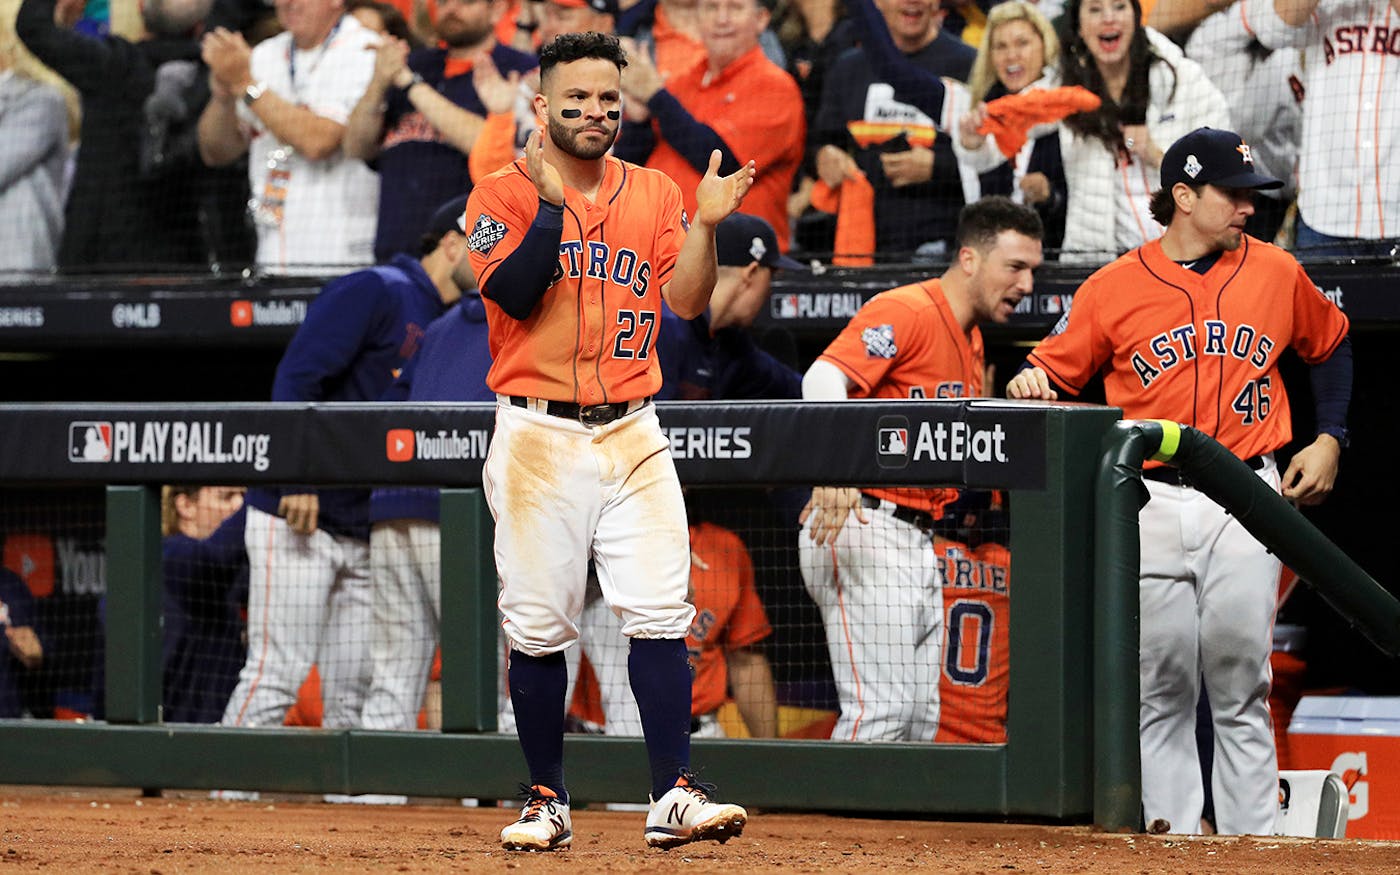 Shirts and skinned! Astros' Jose Altuve steals last laugh from